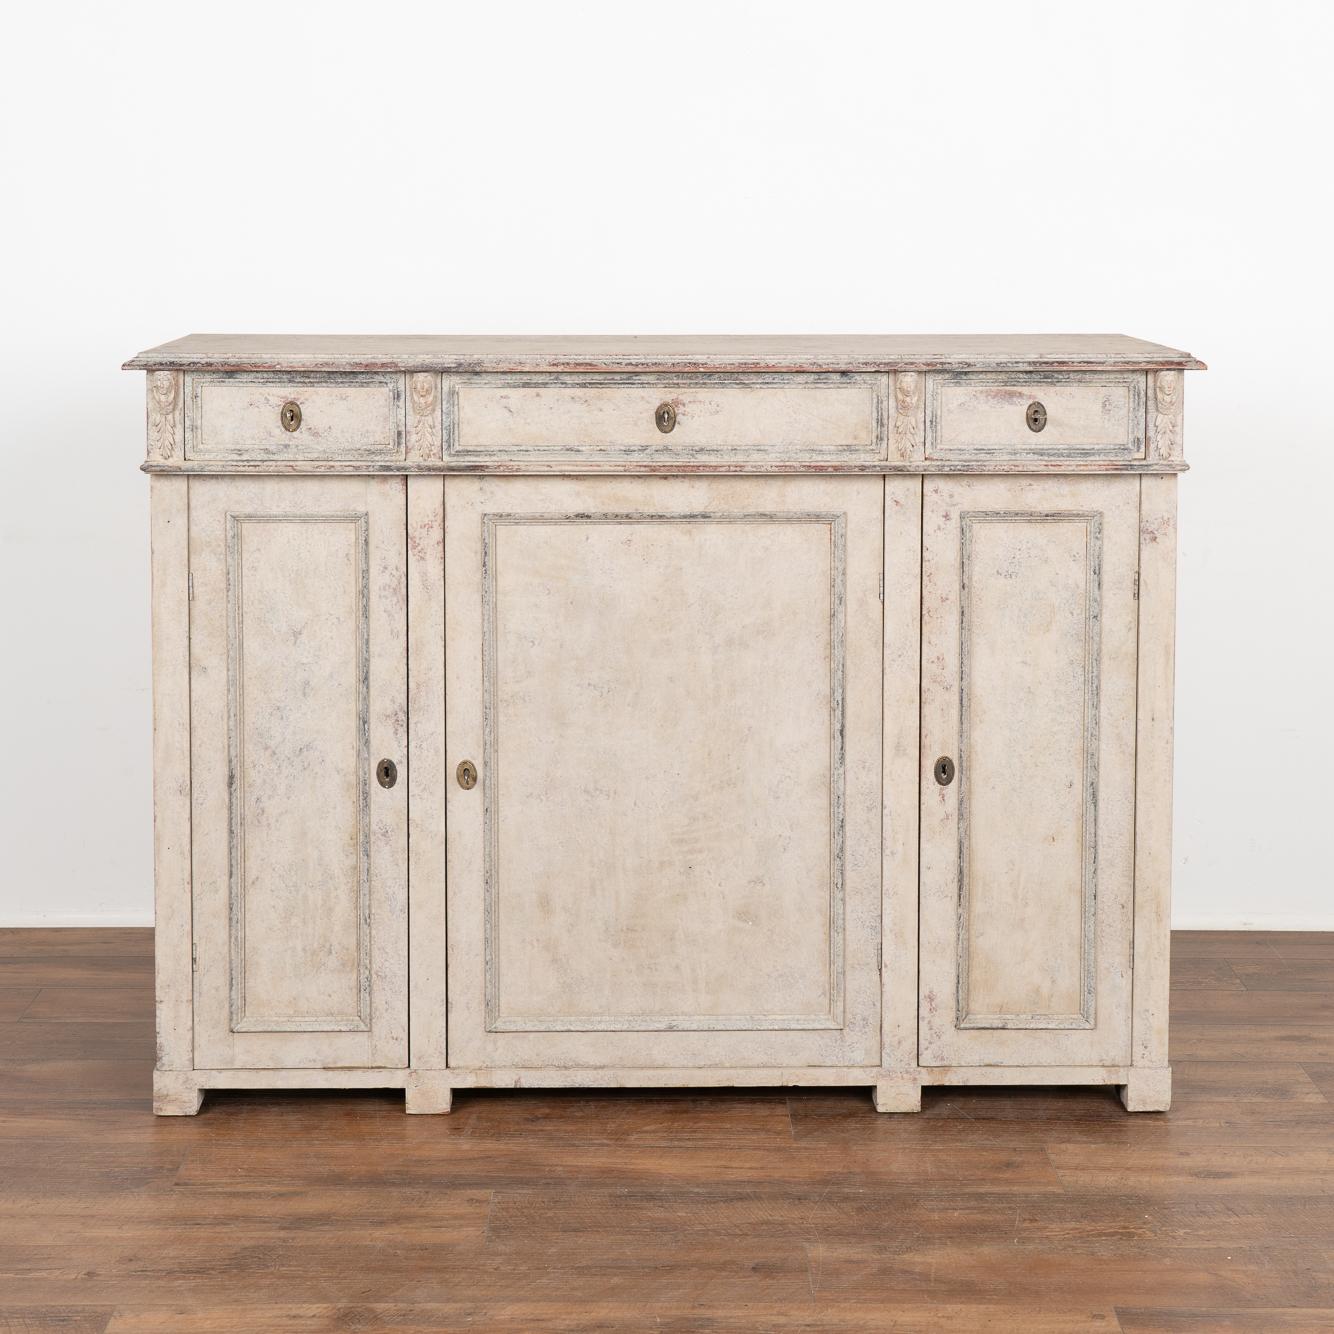 19th Century Swedish Gustavian Gray Painted Sideboard Cabinet, circa 1840 For Sale